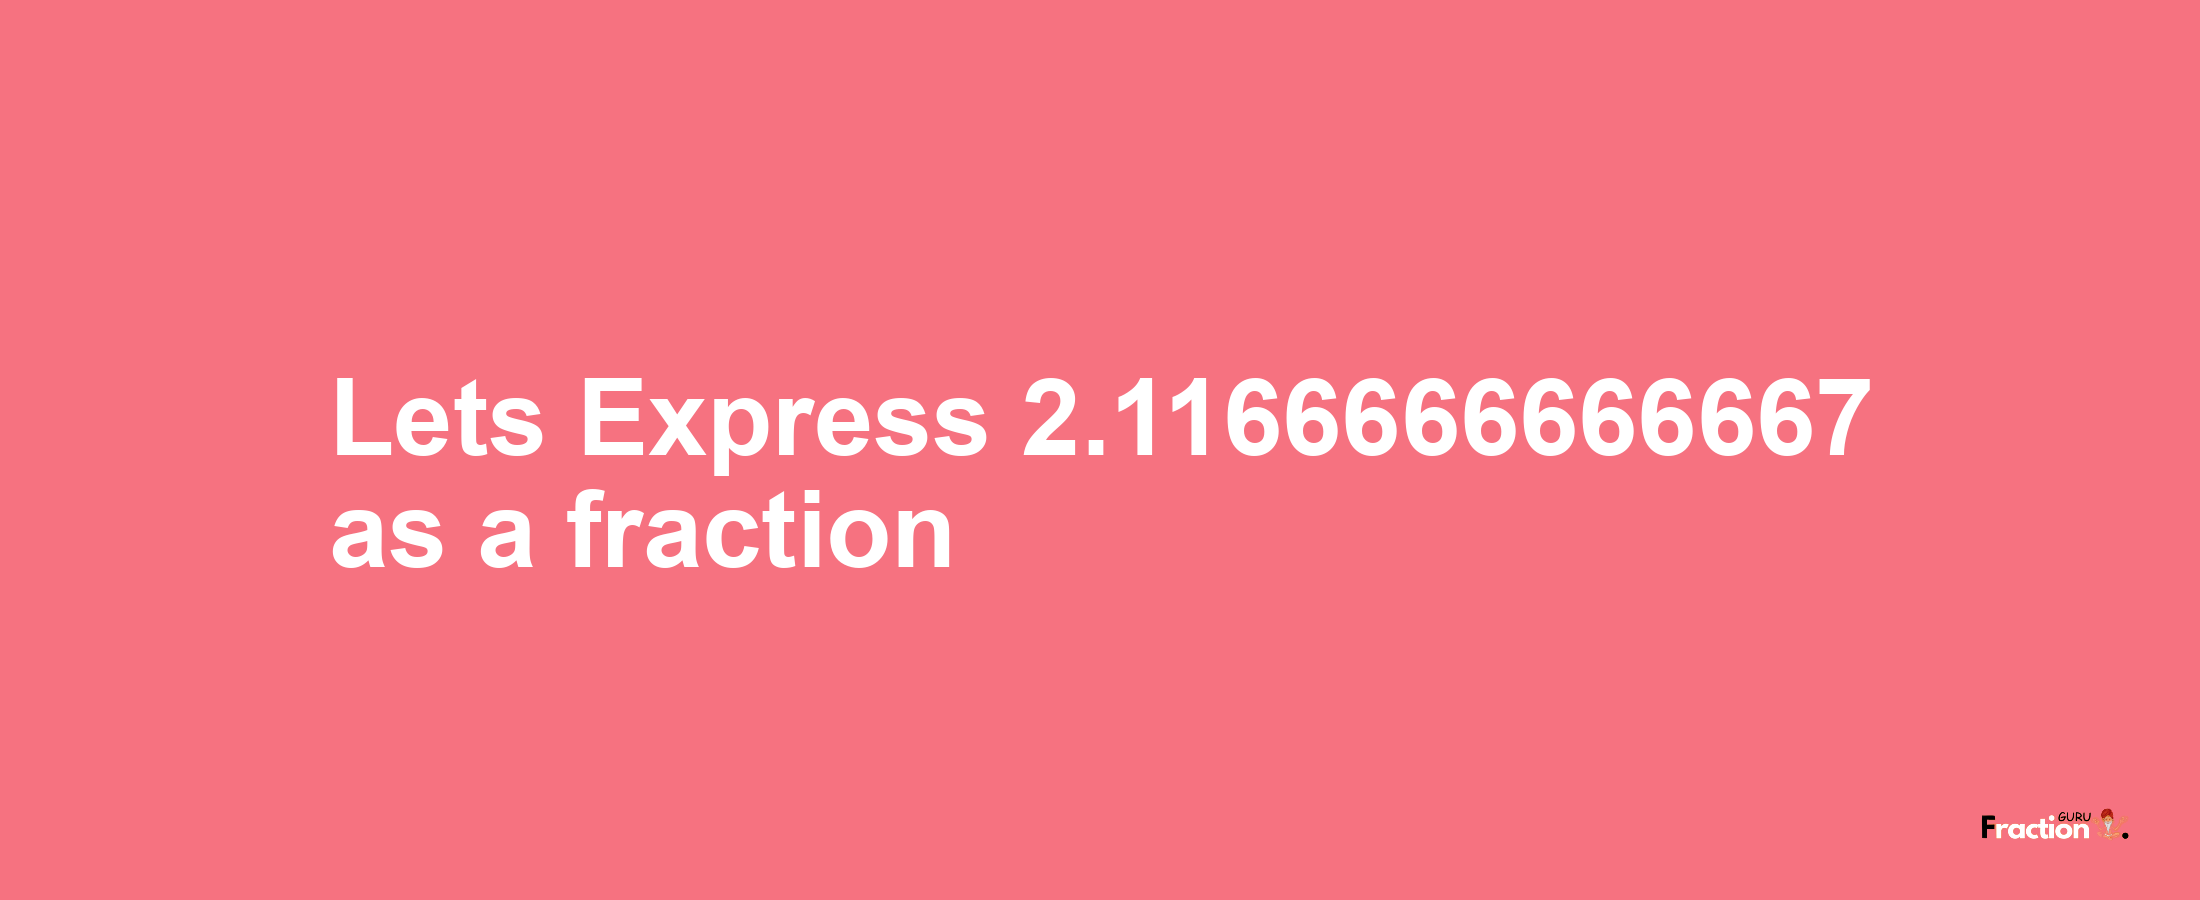 Lets Express 2.1166666666667 as afraction